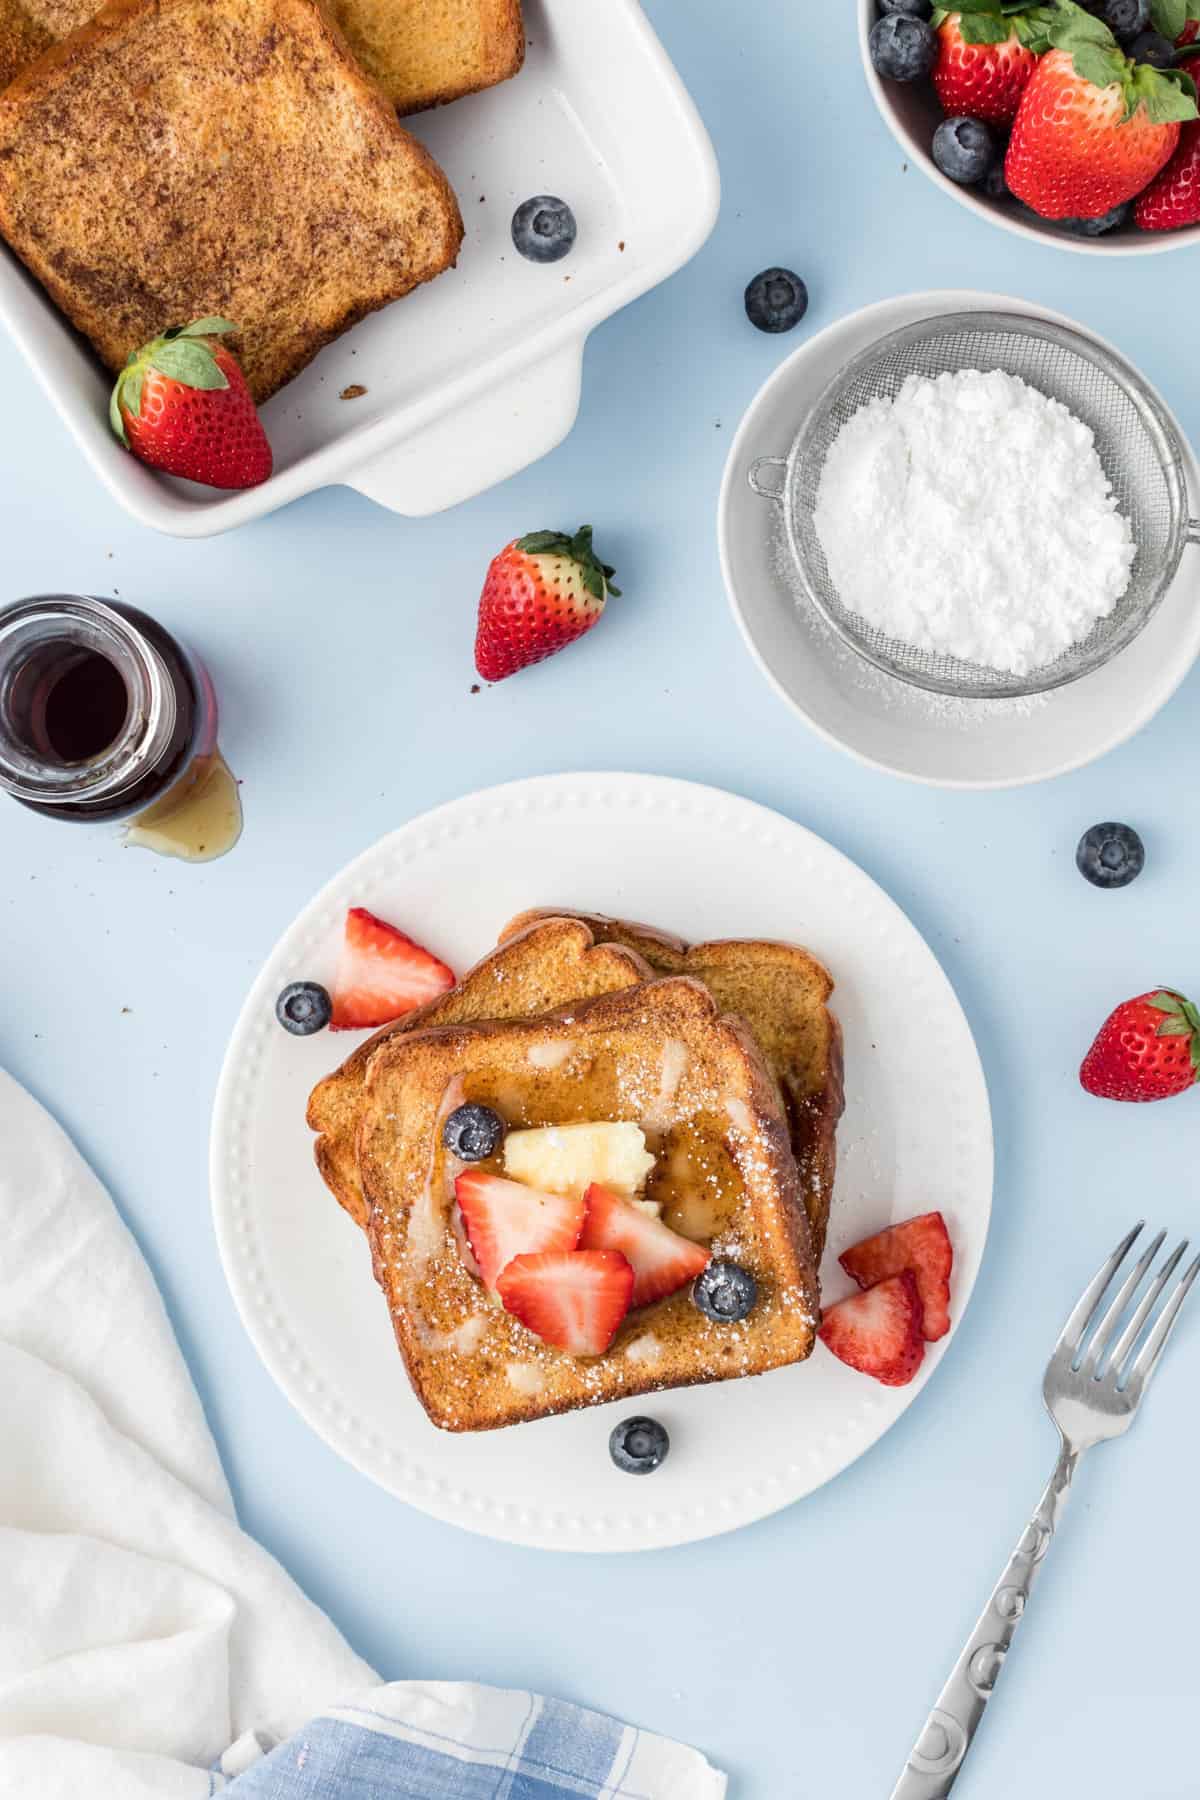 A plate with french toast and berries is placed next to a small bowl of powdered sugar.